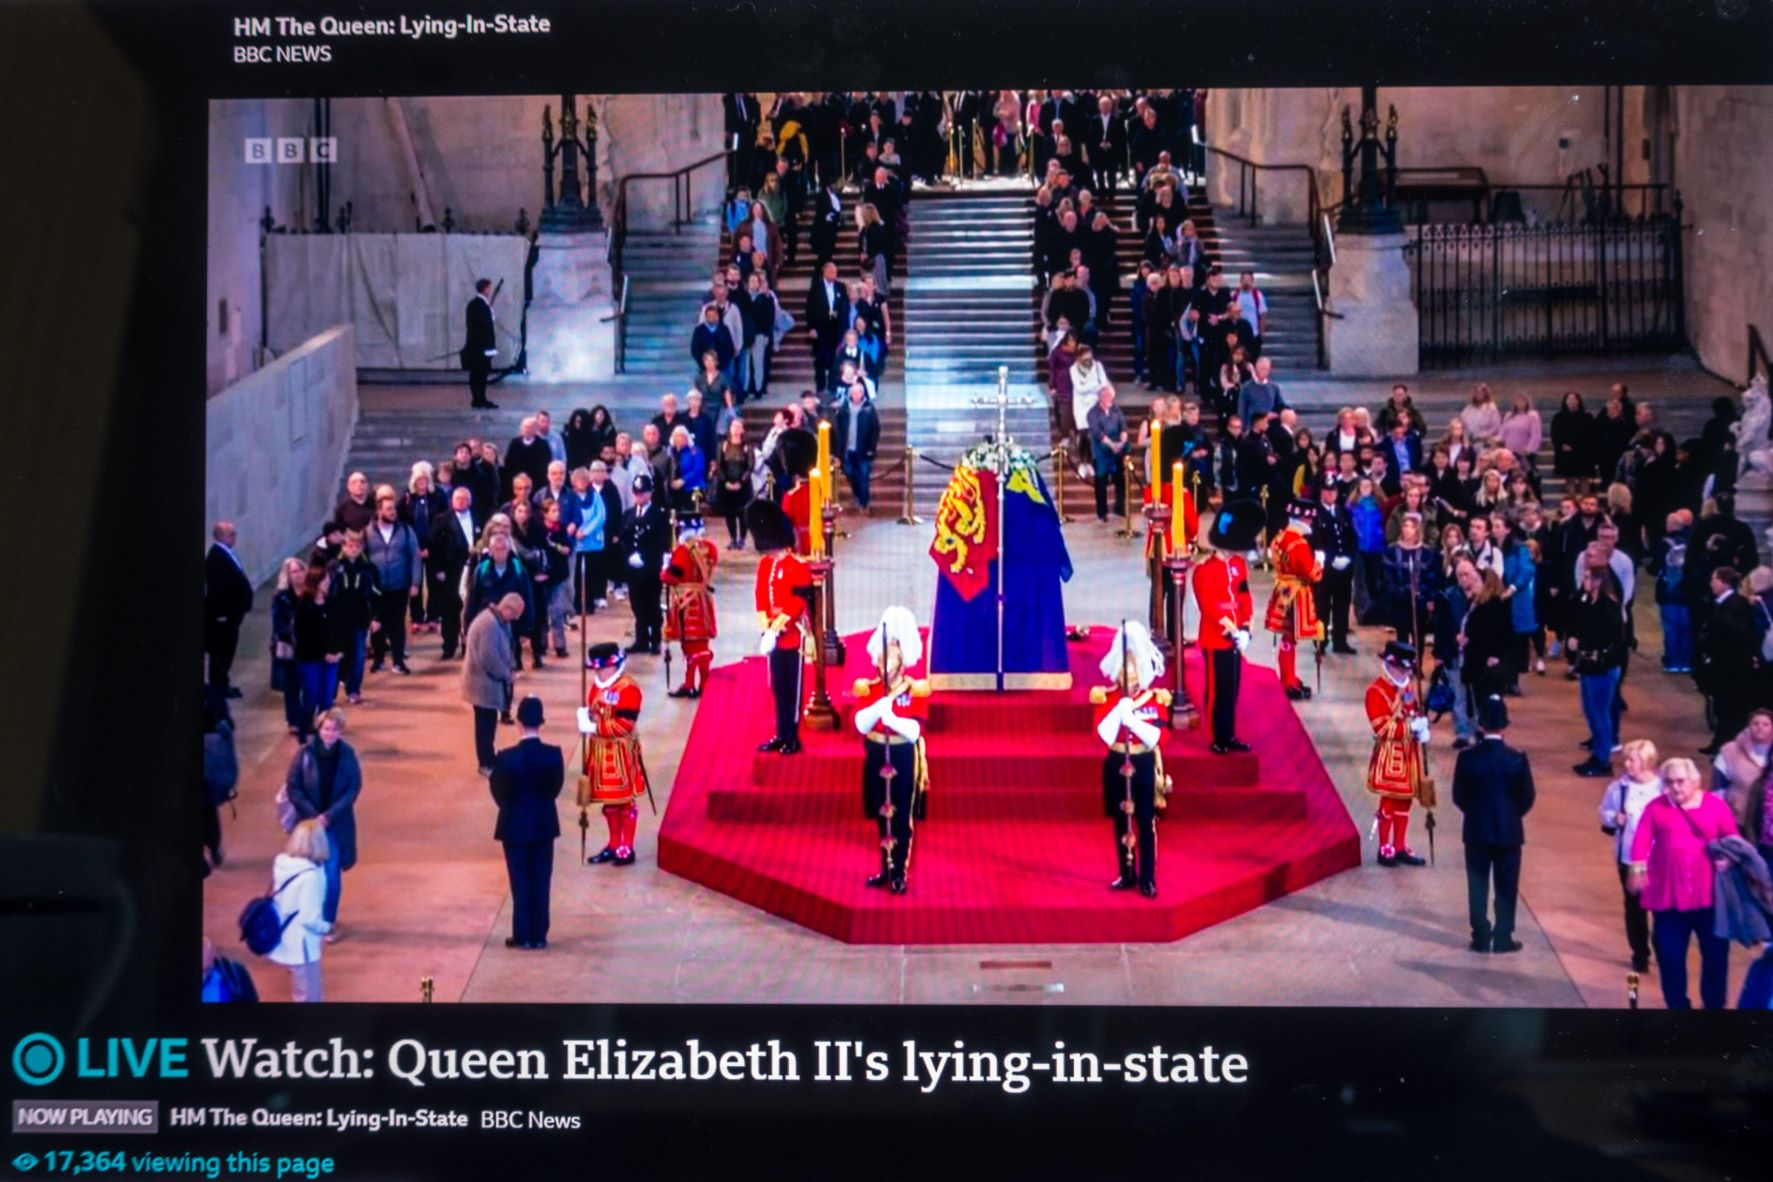 A TV screen showing BBC News coverage of the Queen's Lying-in-State